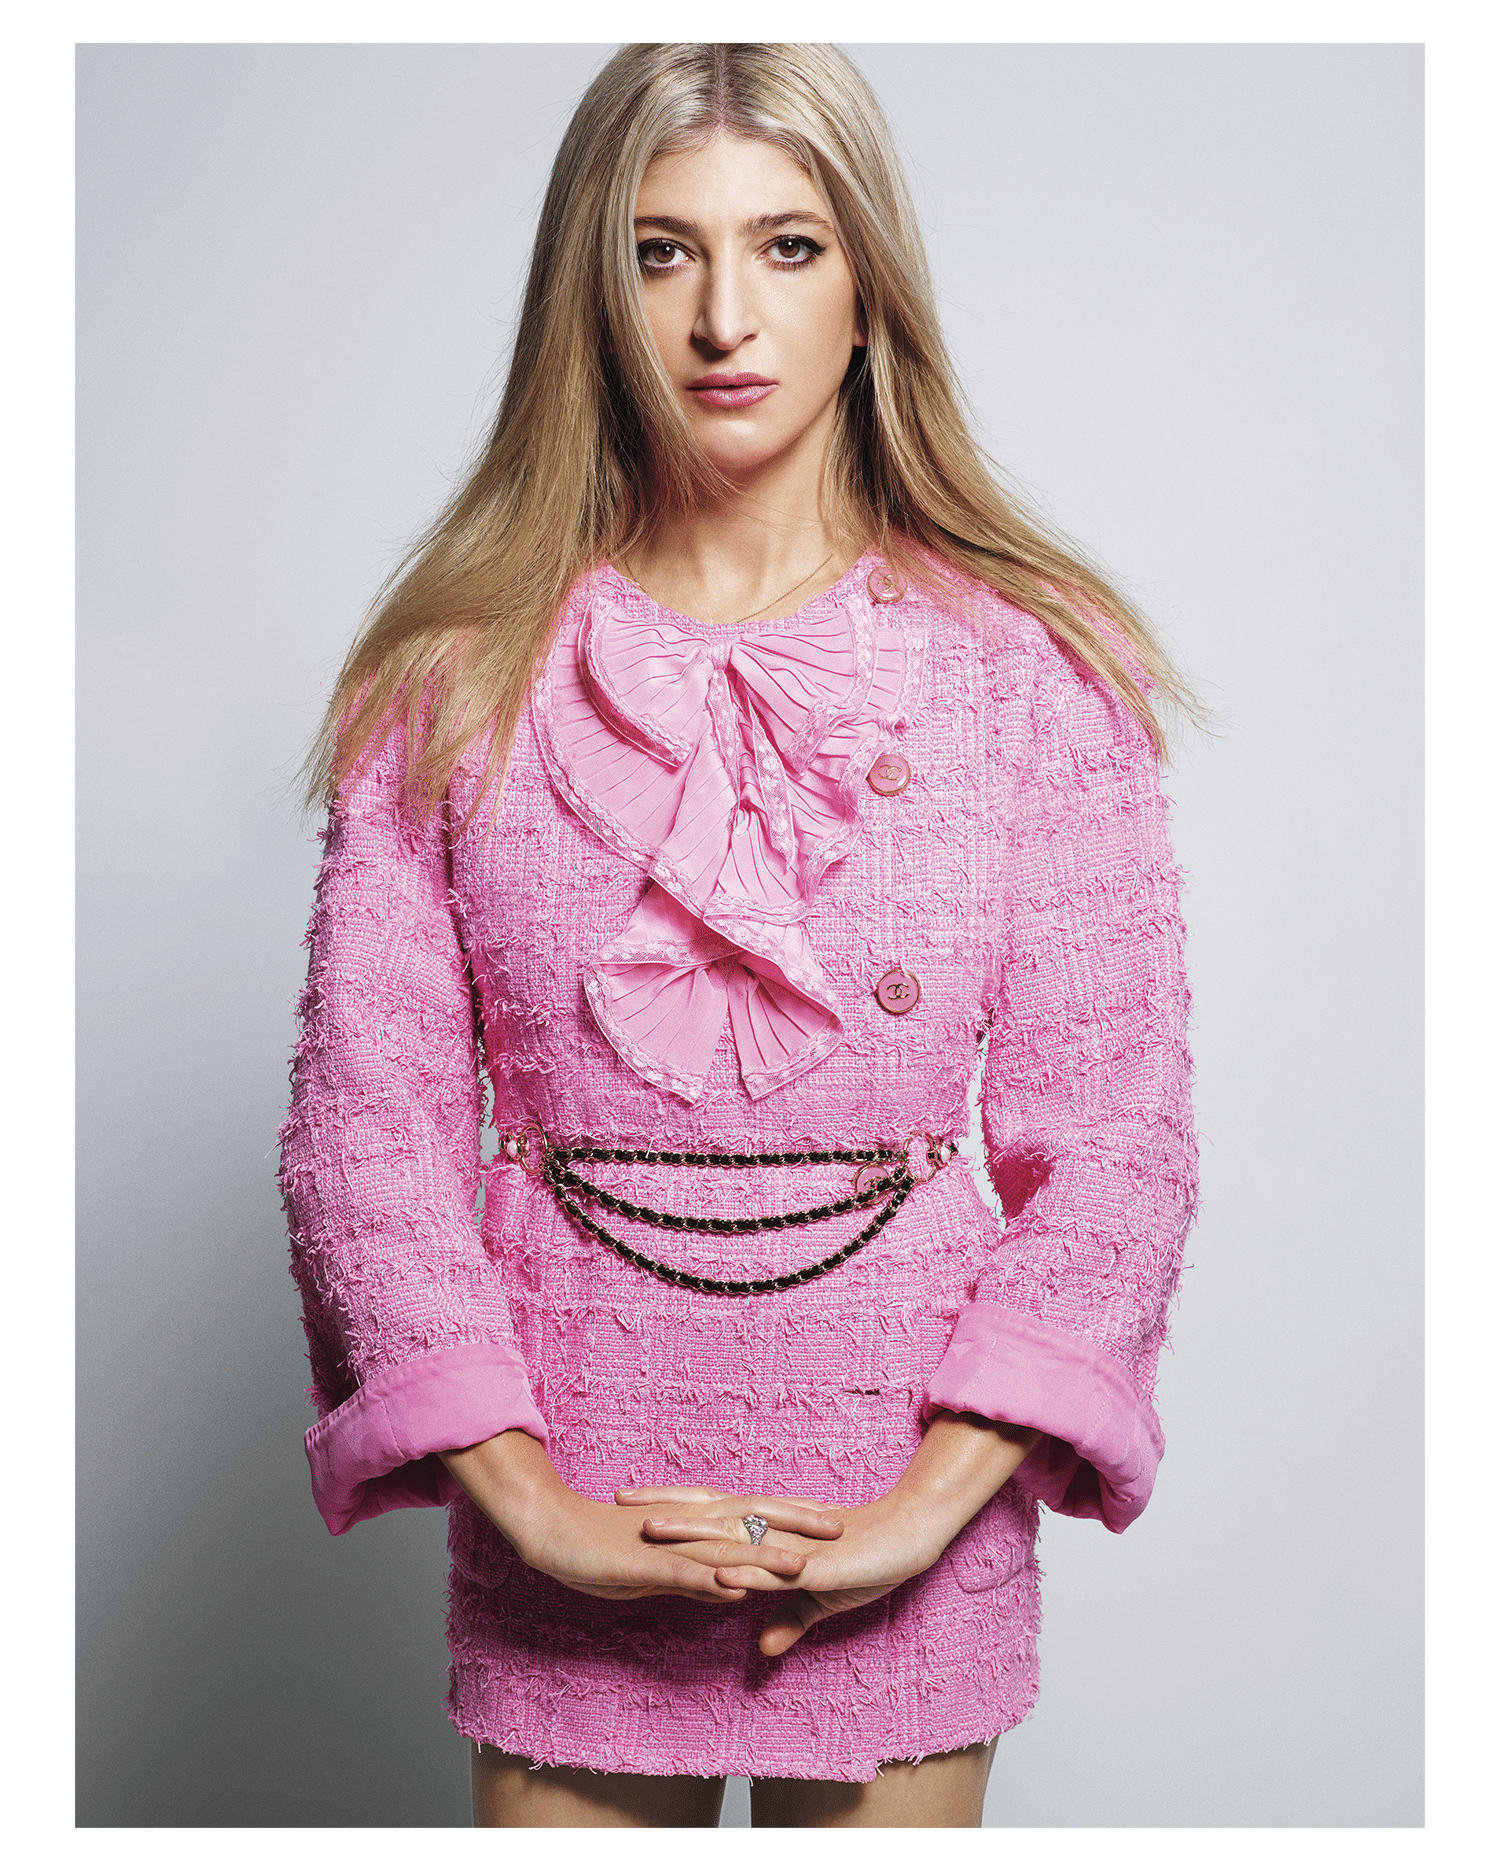 Sarah Hoover Is Reinventing the New York Multihyphenate in Cartoon Pink Chanel picture